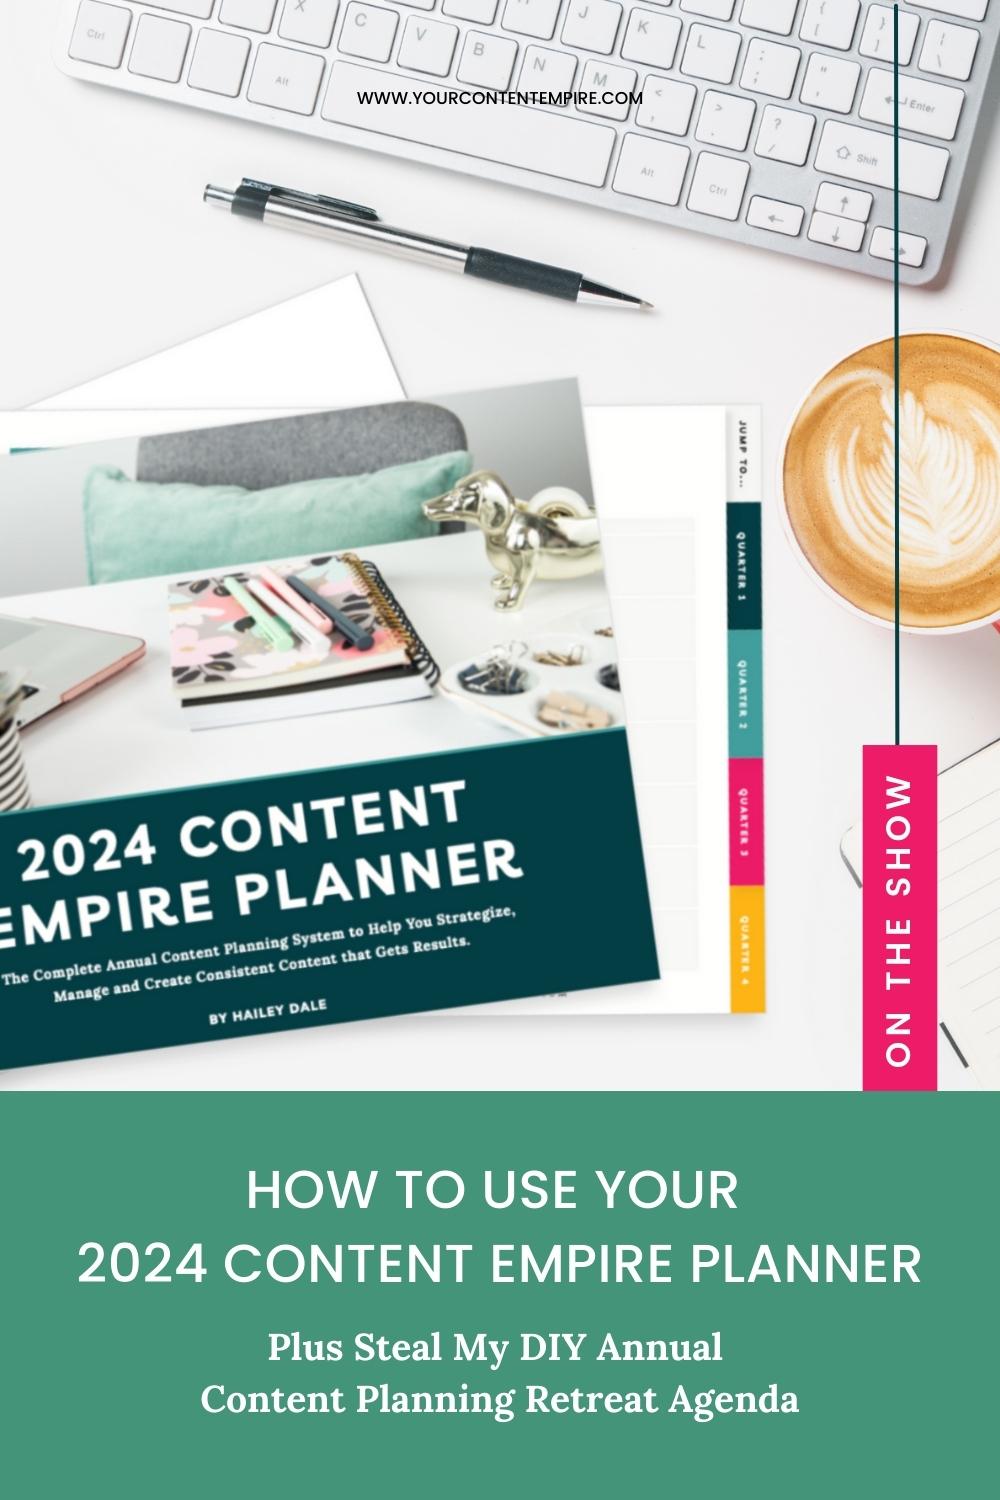 How to Use Your 2024 Content Planner